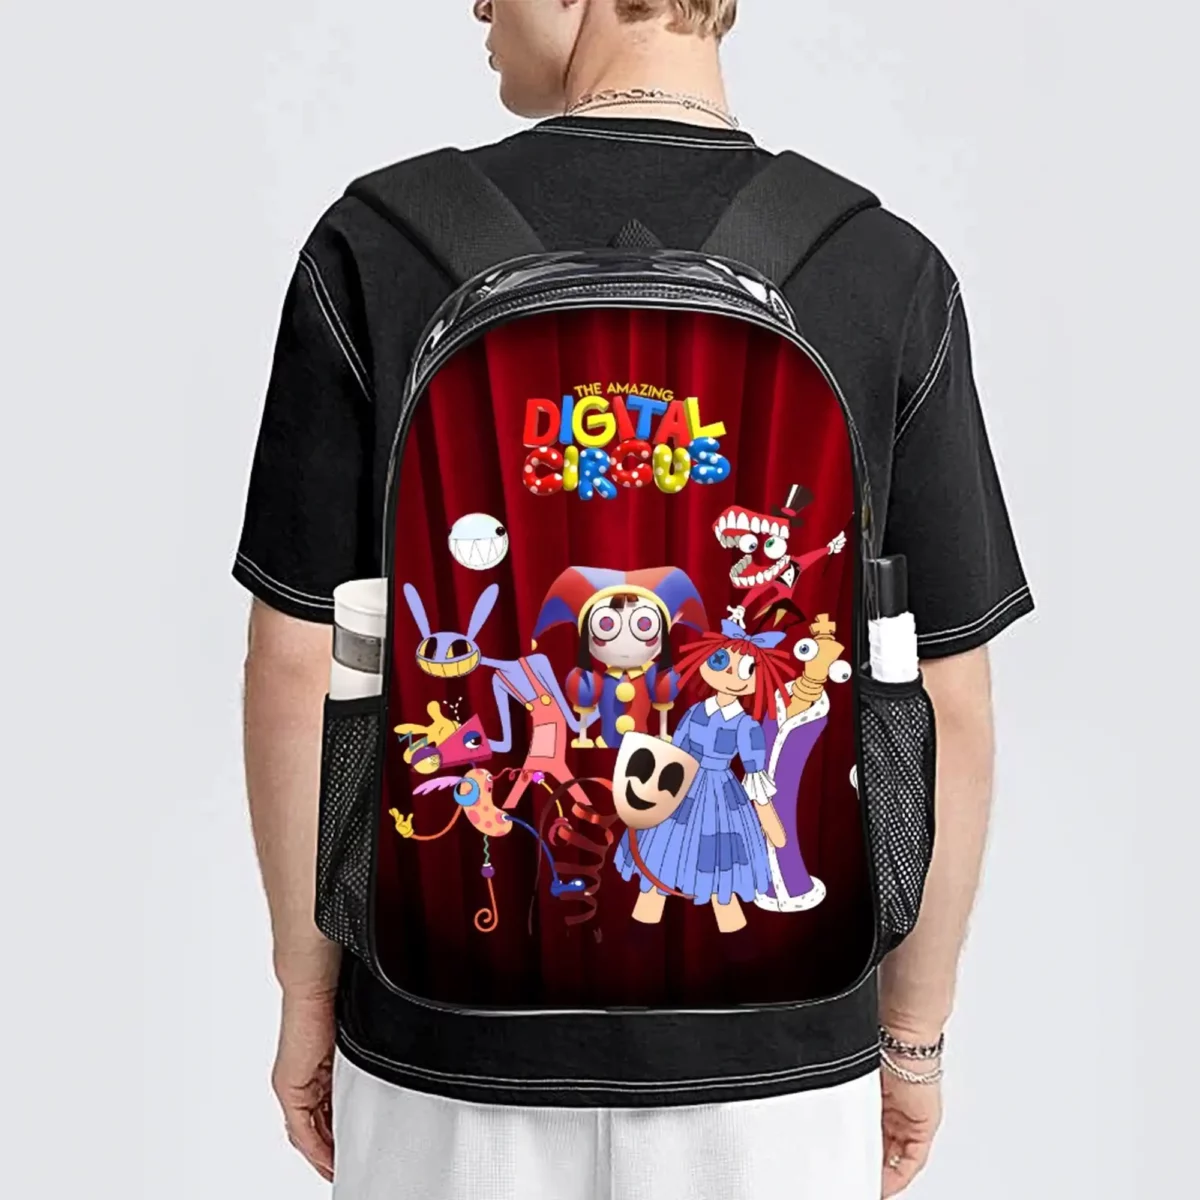 The Amazing Digital Circus Transparent Backpack – 17 Inches Book Bag Cool Kiddo 12